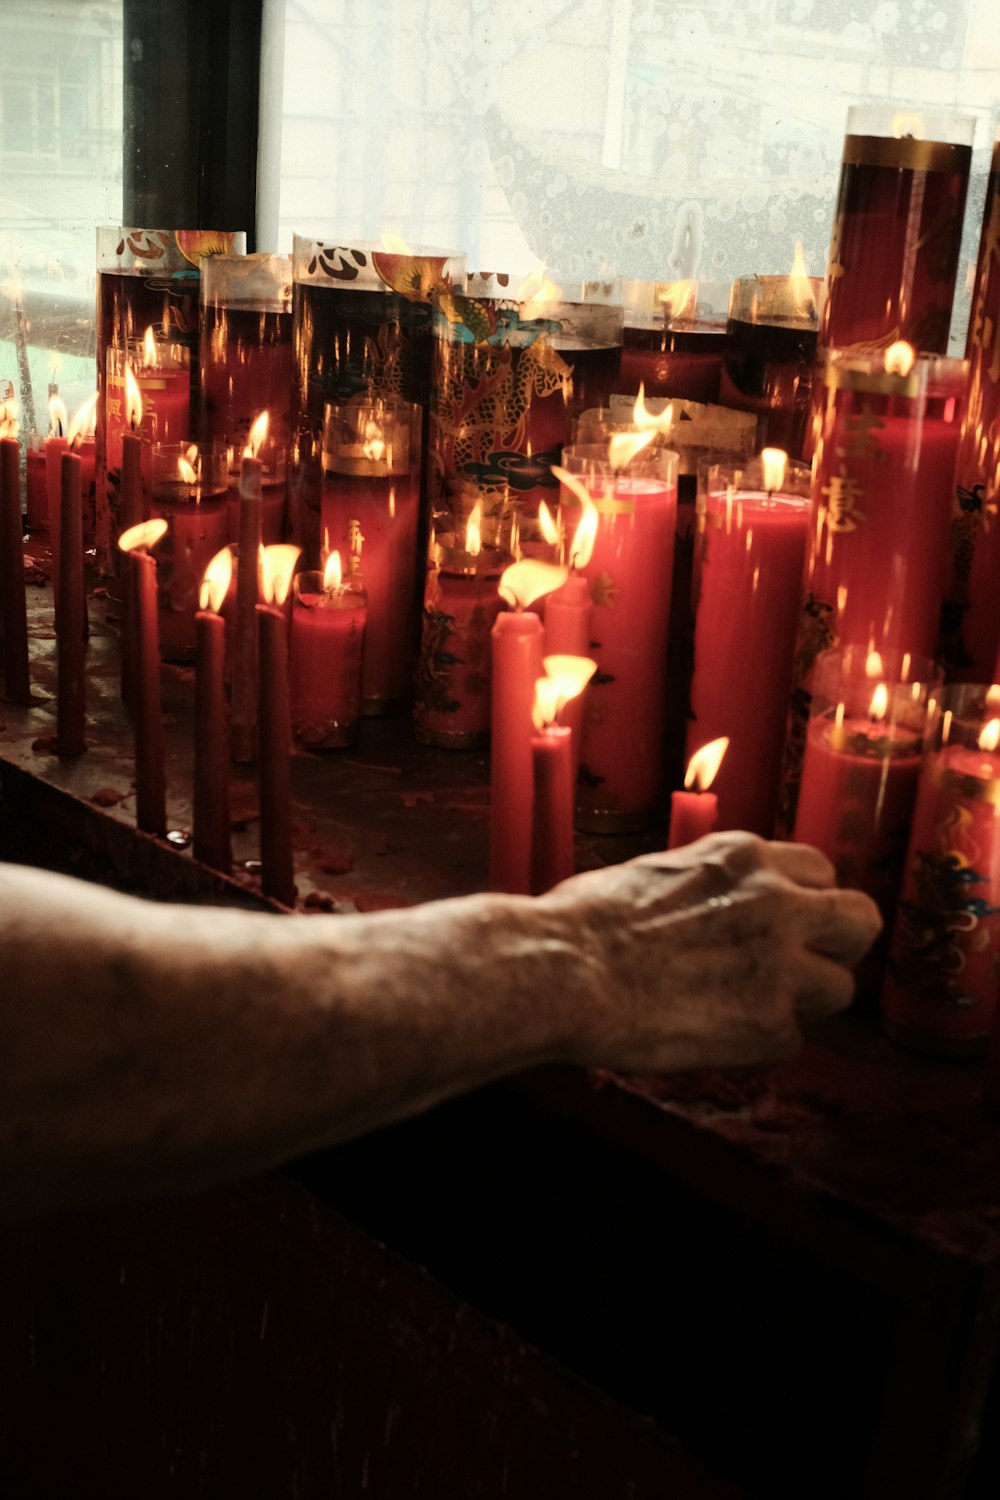 a person's hand is on a table with many lit candles